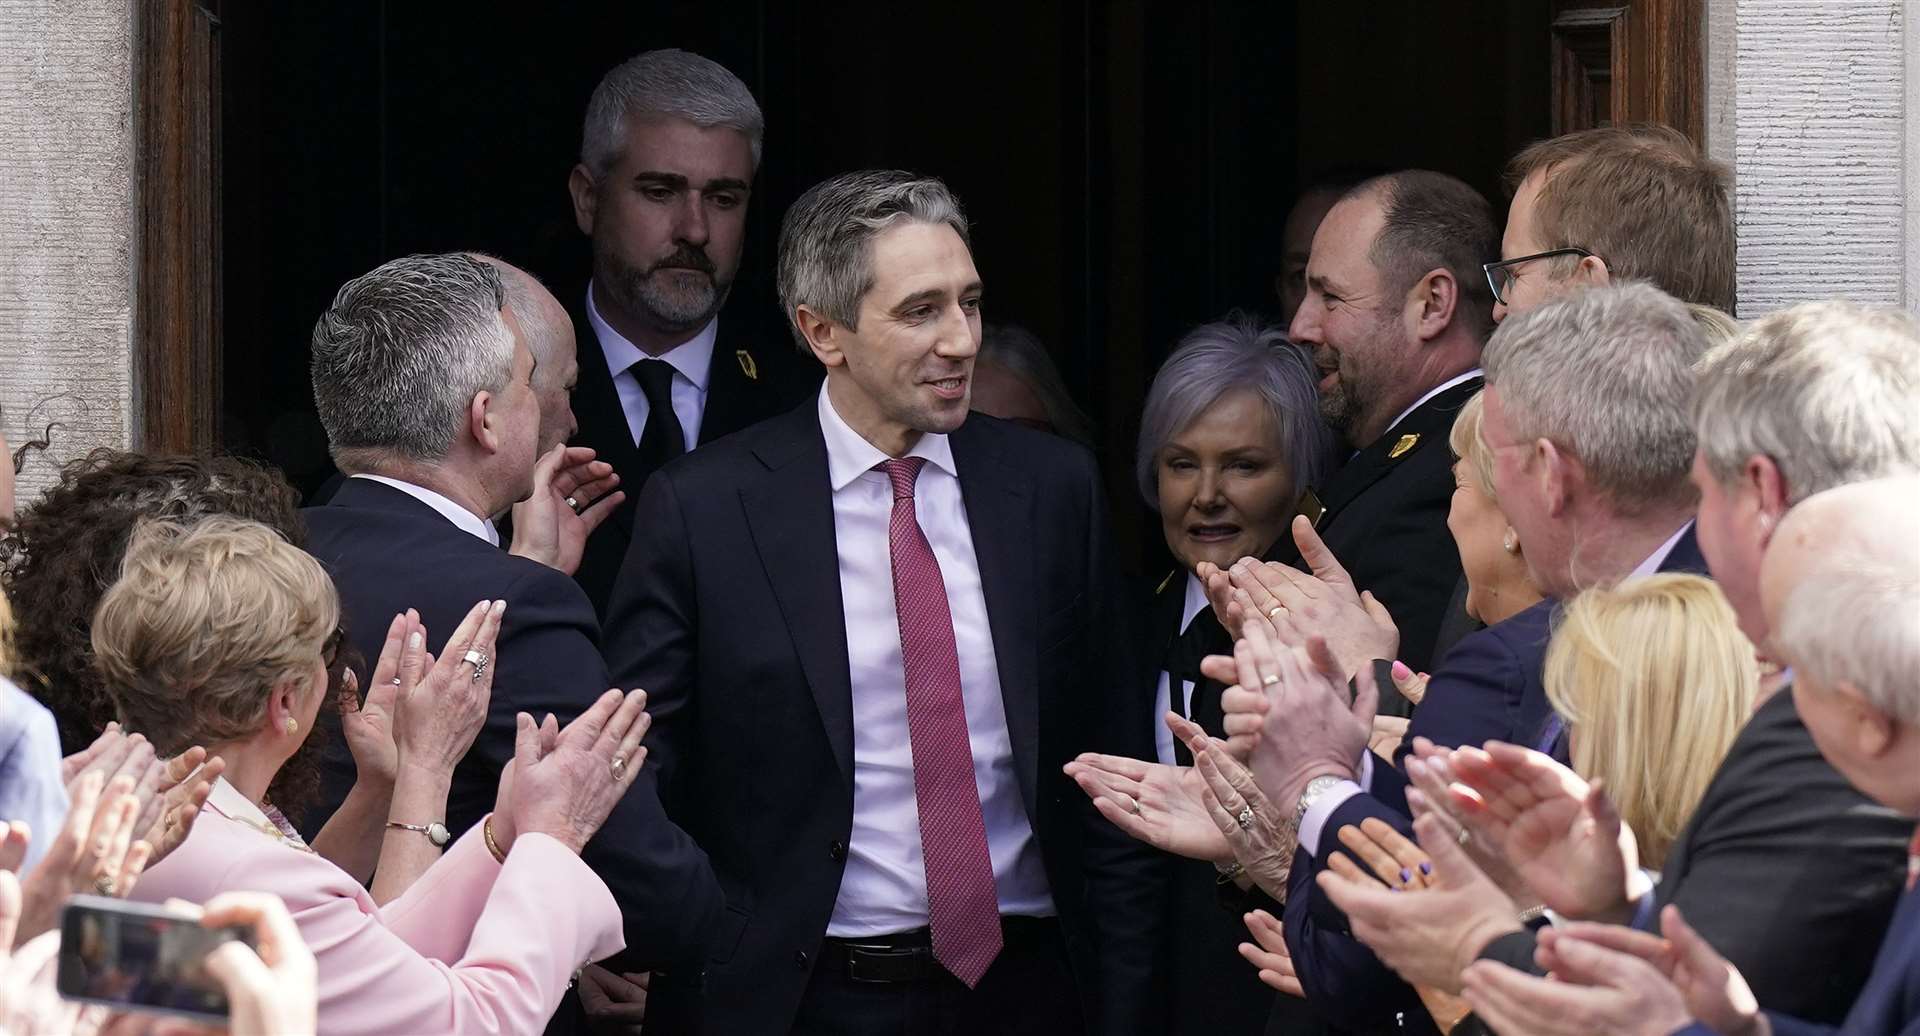 Newly elected Taoiseach Simon Harris leaves the Dail, in Dublin, following the vote by Irish parliamentarians to elect him, making him the youngest Taoiseach in the Republic of Ireland’s history (Niall Carson/PA)